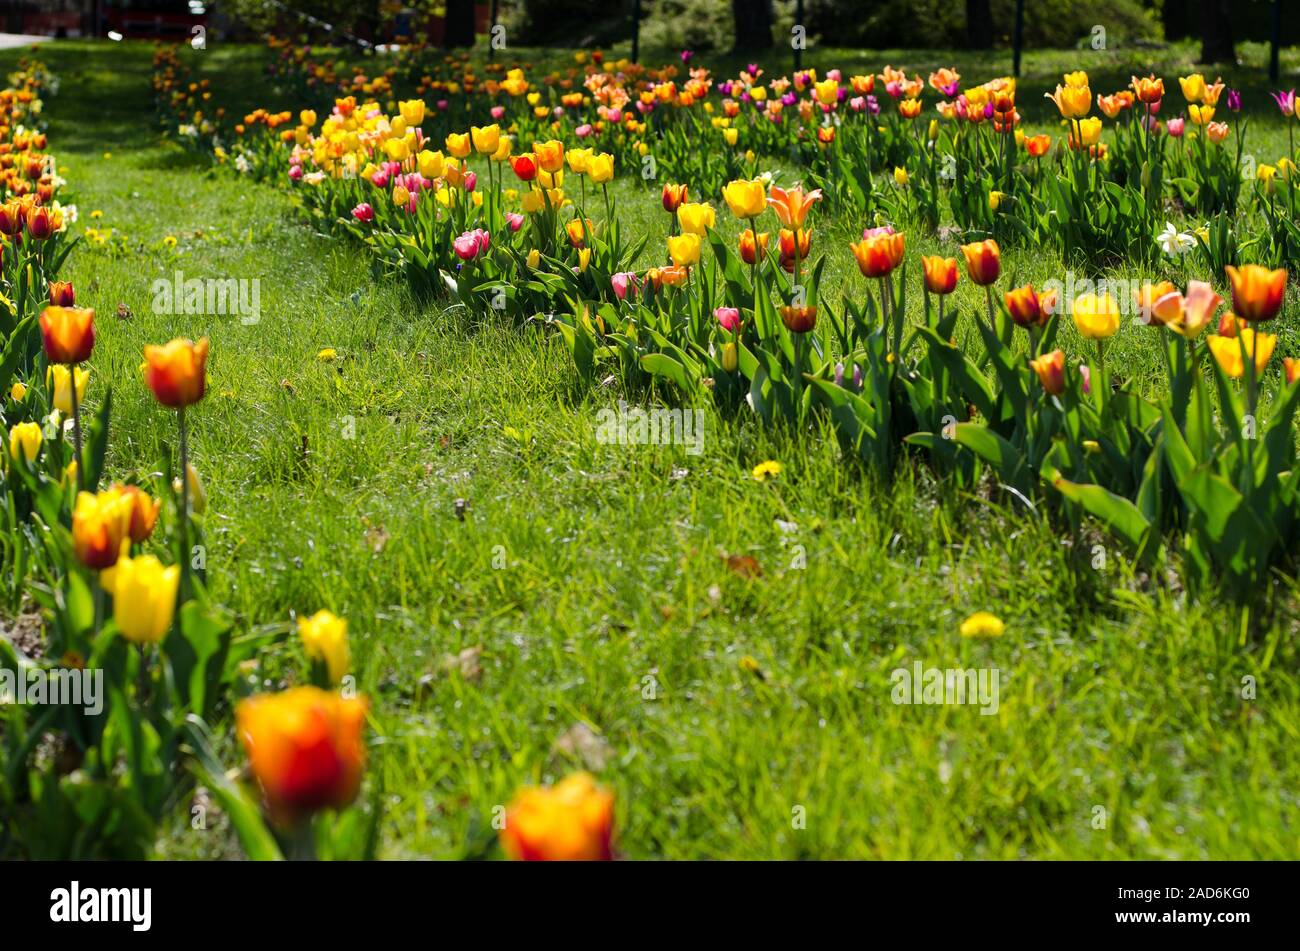 Tulips in several rows on a grassfield in a park Stock Photo